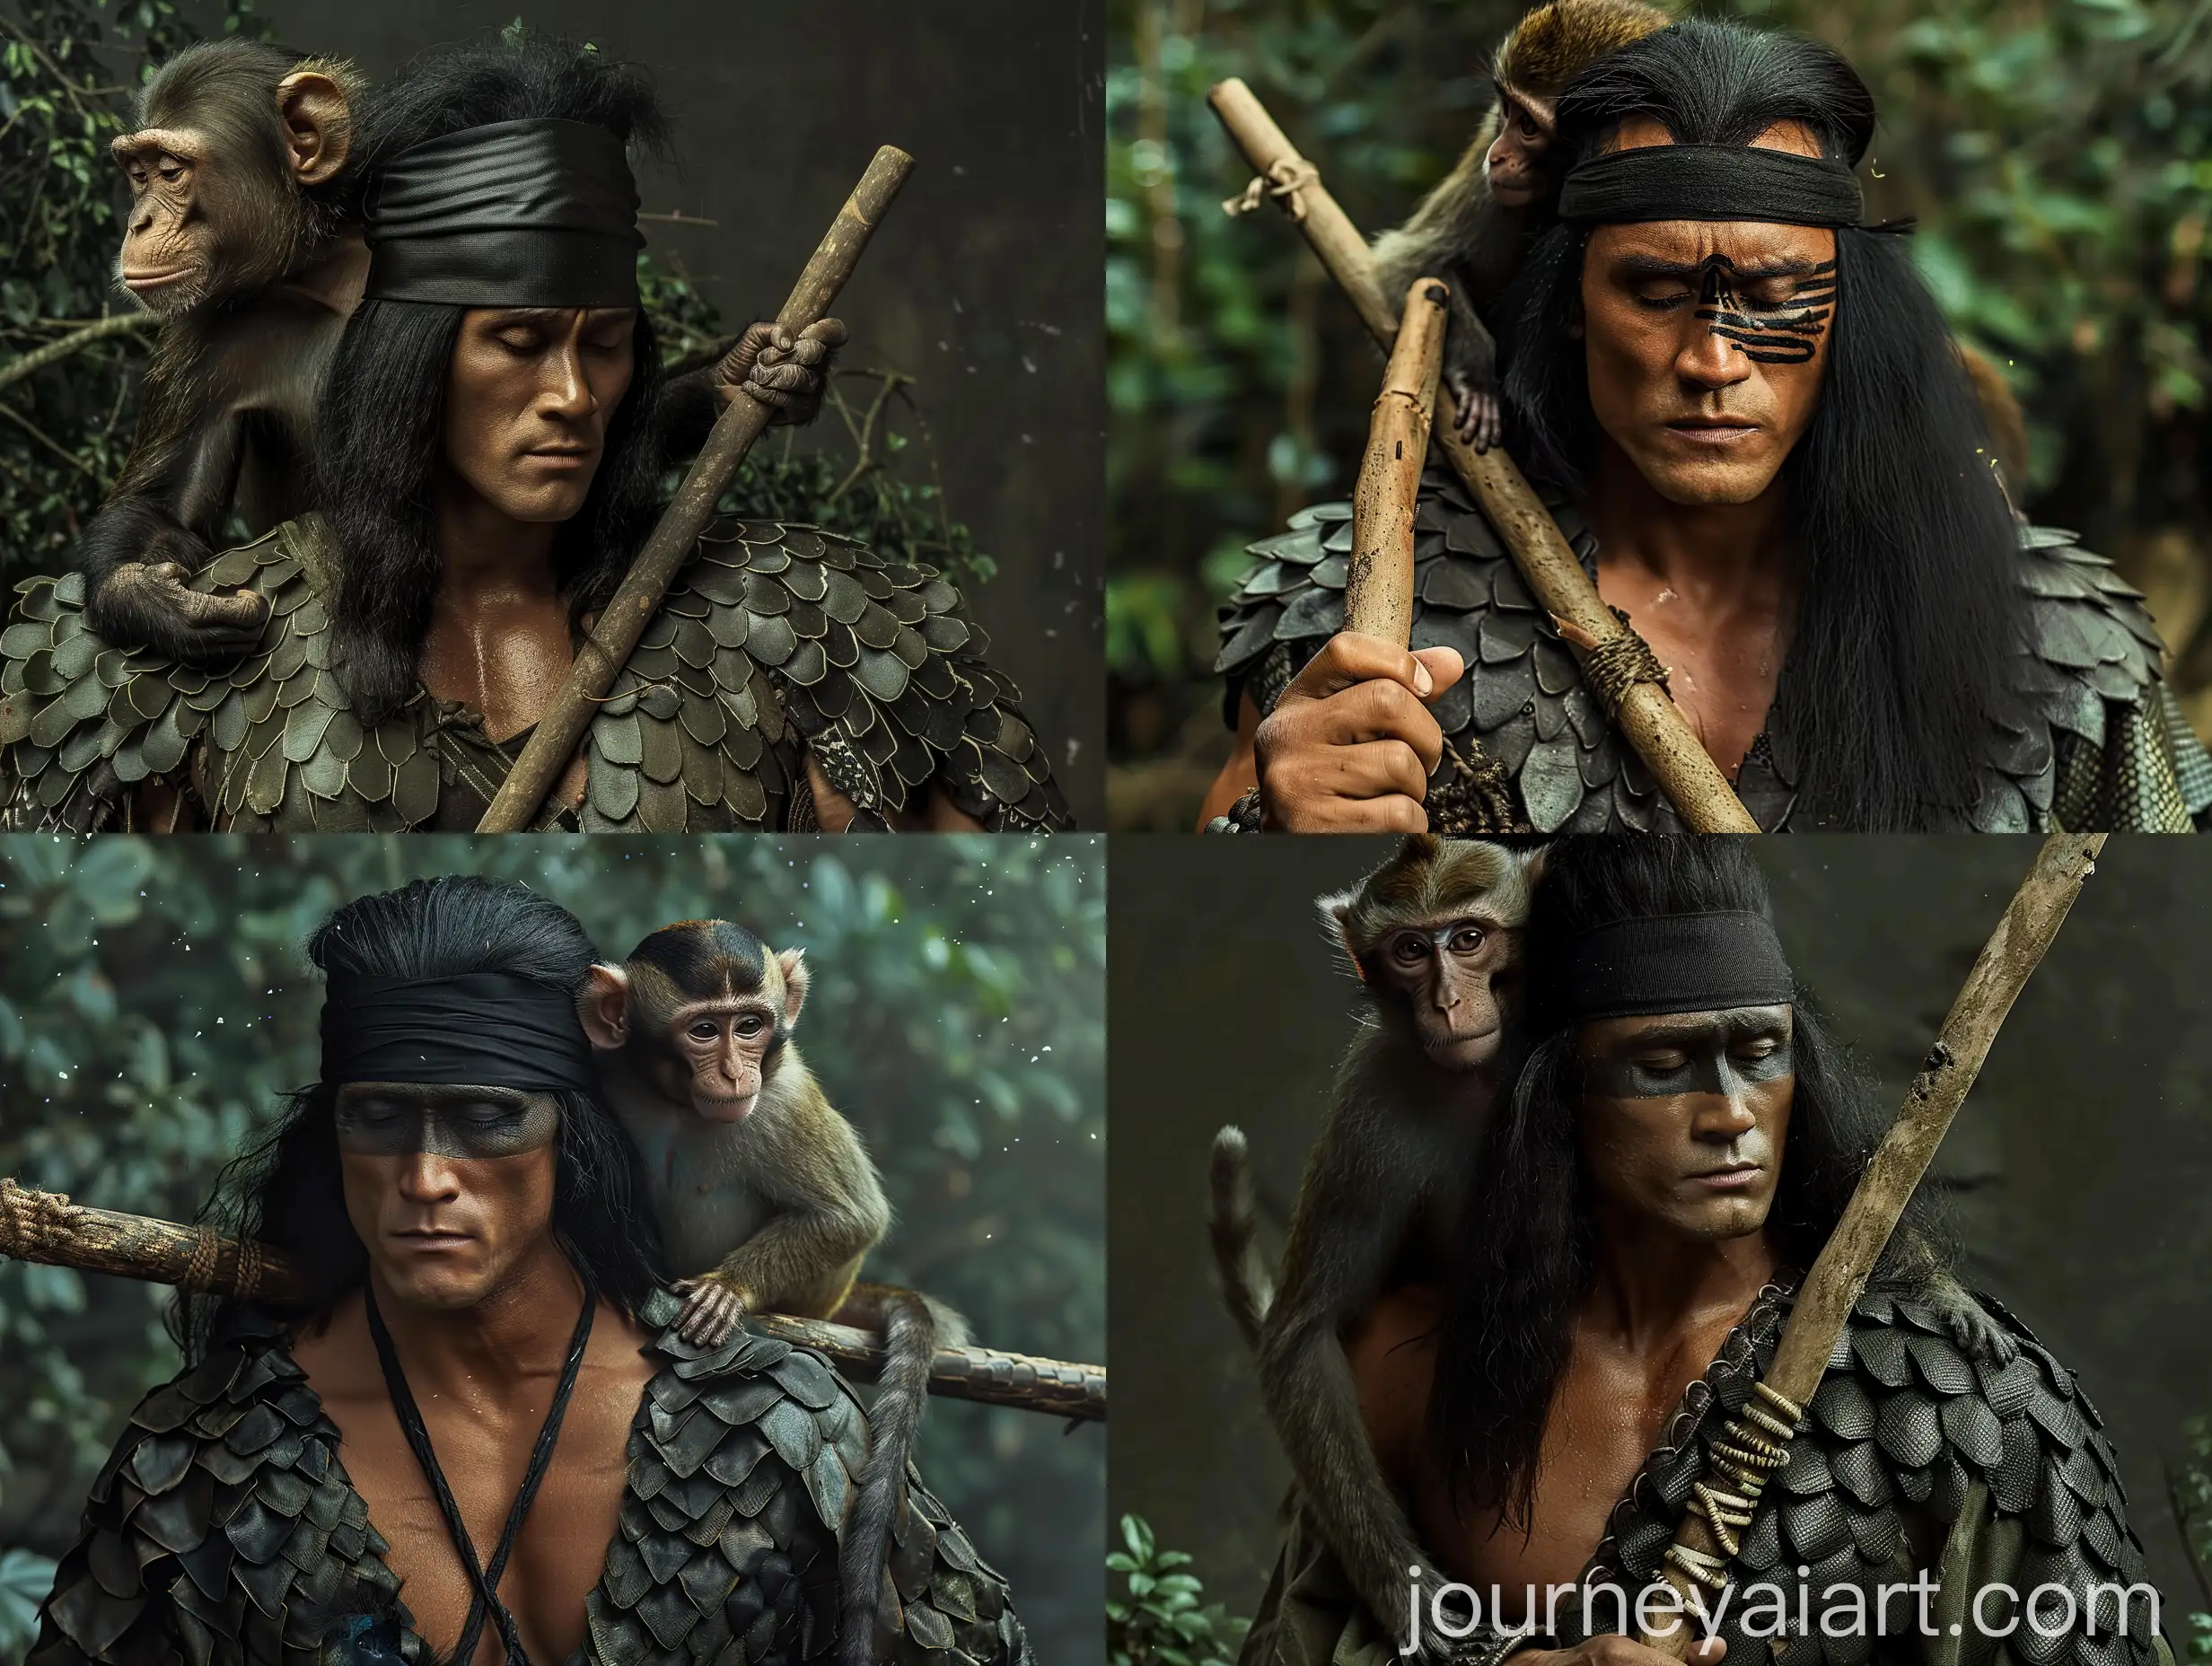 Indonesian-Male-Warrior-with-Sleeping-Blind-Eyes-and-Monkey-Companion